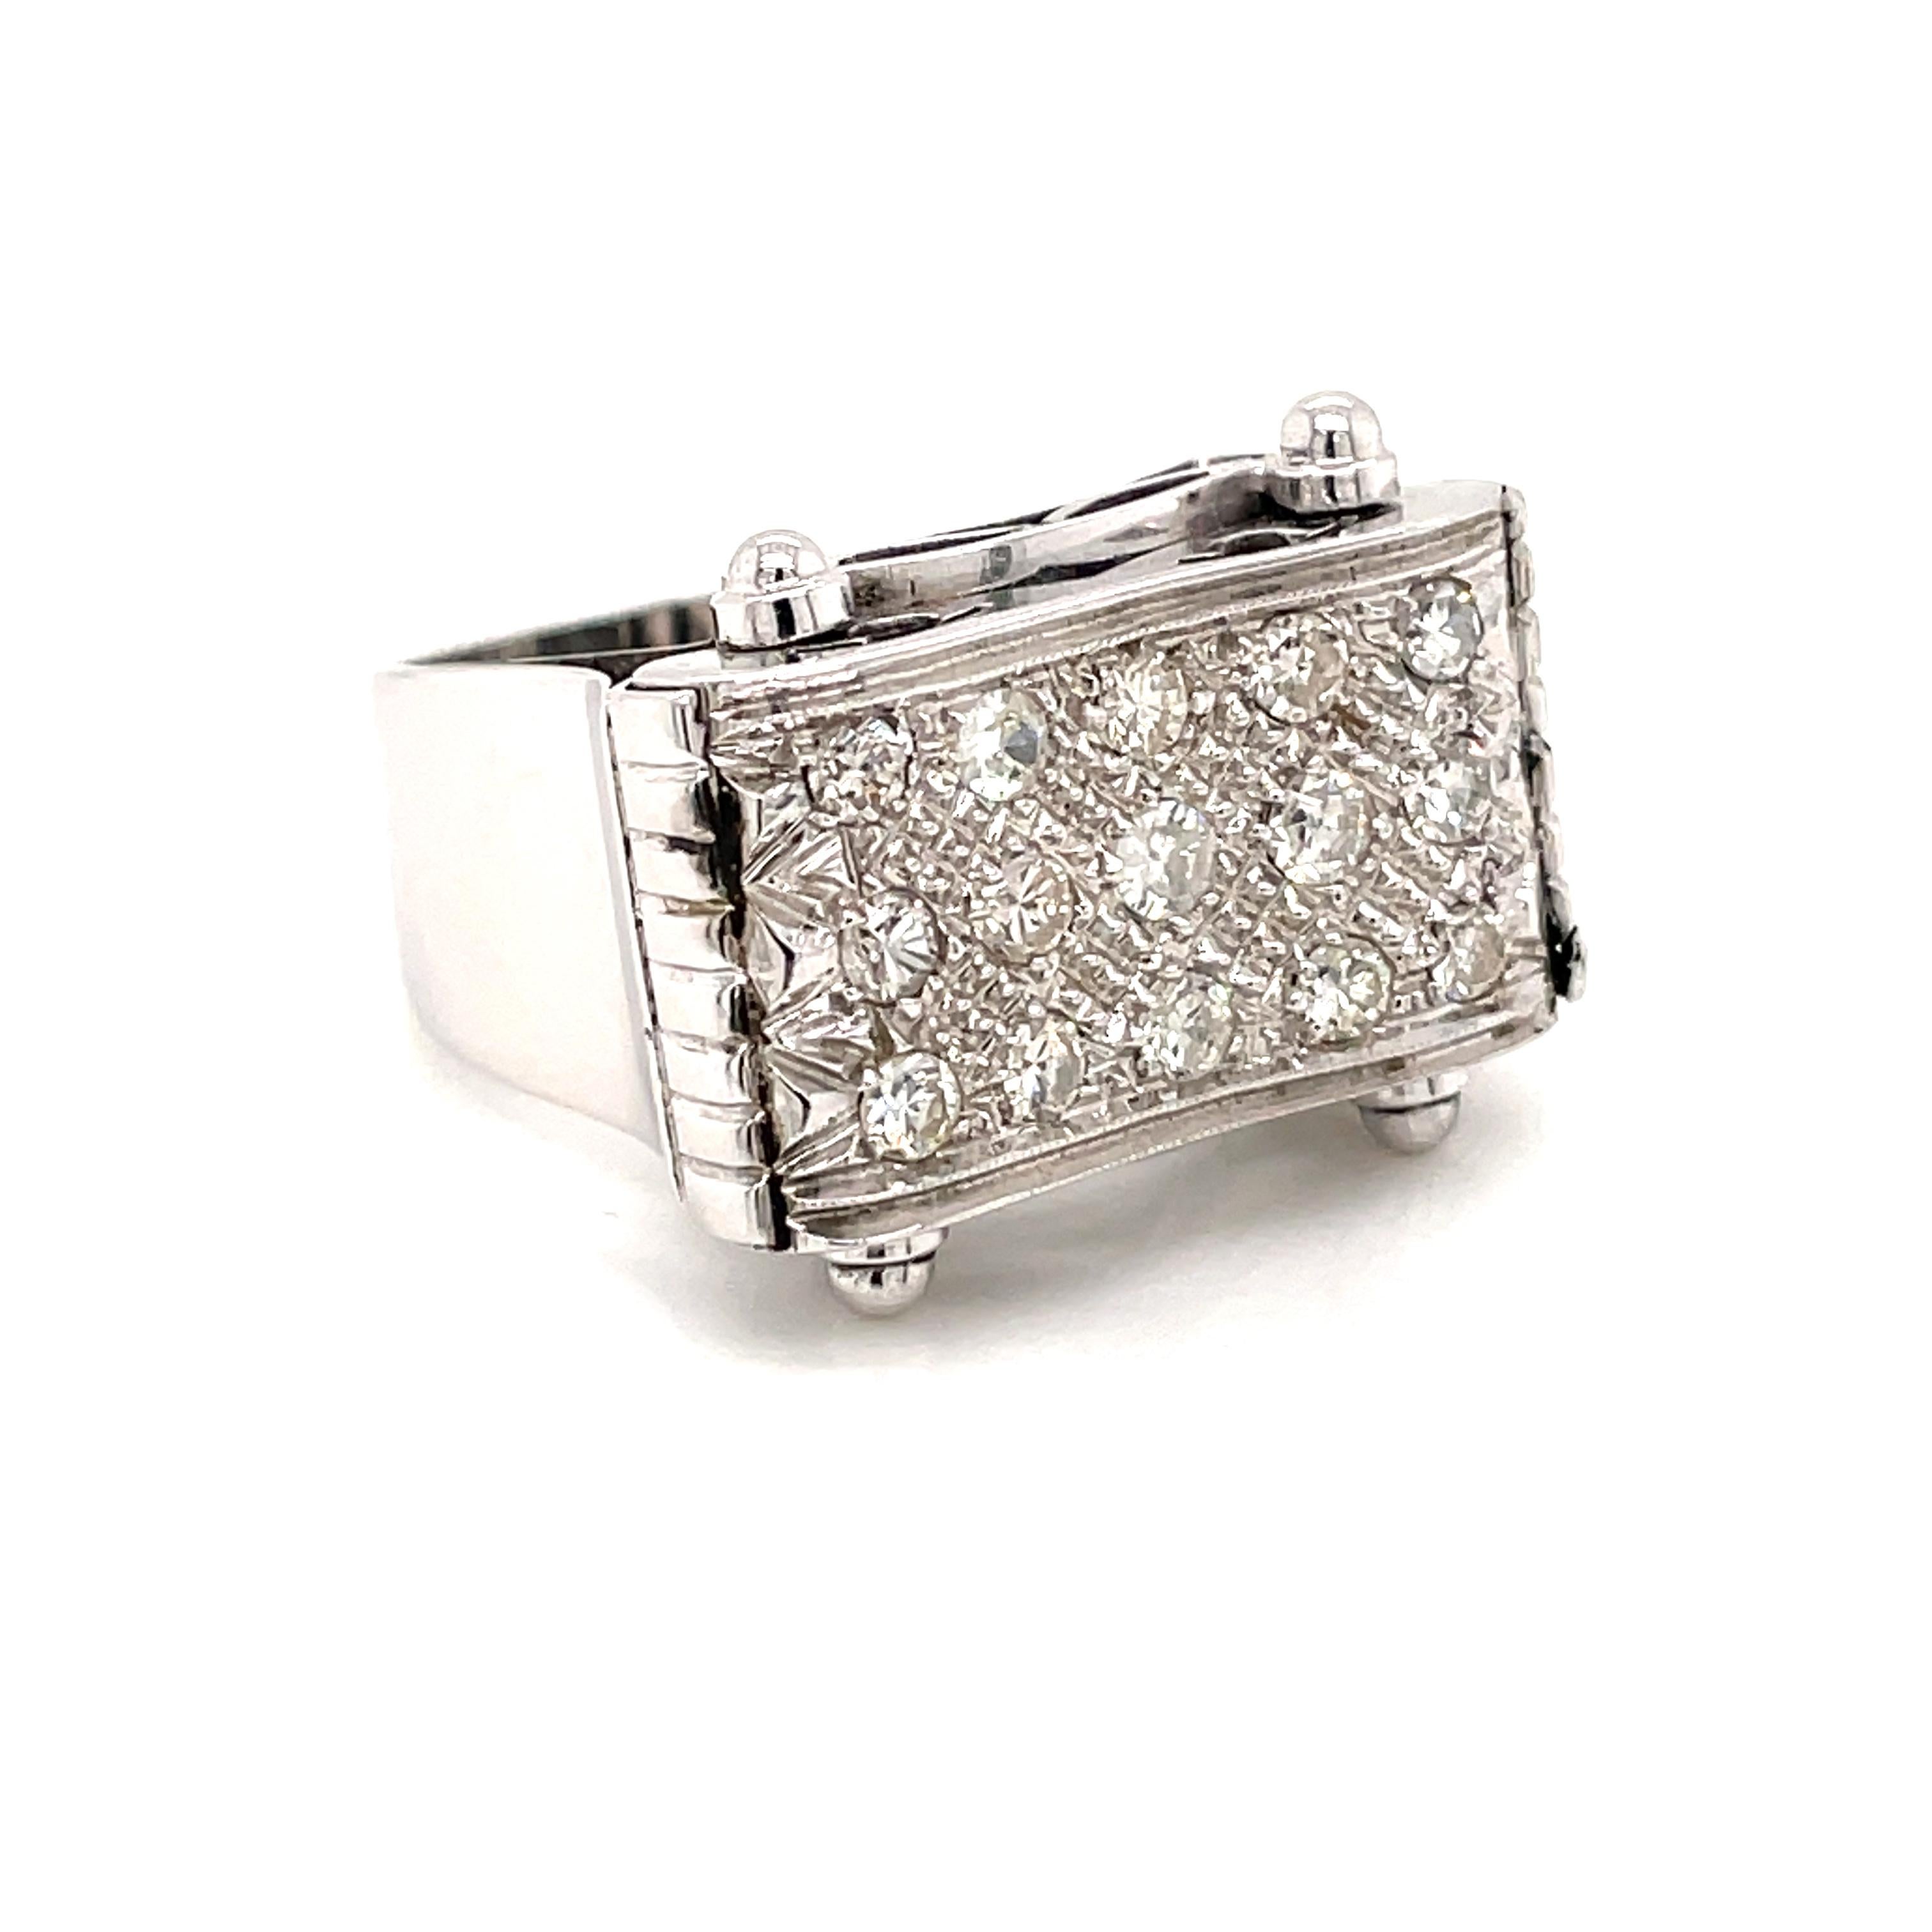 This beautiful Retro cocktail ring is crafted in 18k white gold and jeweled with 15 sparkling old mine cut diamonds weighing 1 total carats G-H color VVS clarity. Circa 1950

CONDITION: Pre-owned - Excellent
METAL: 18k Gold
GEM STONE: Diamond 1